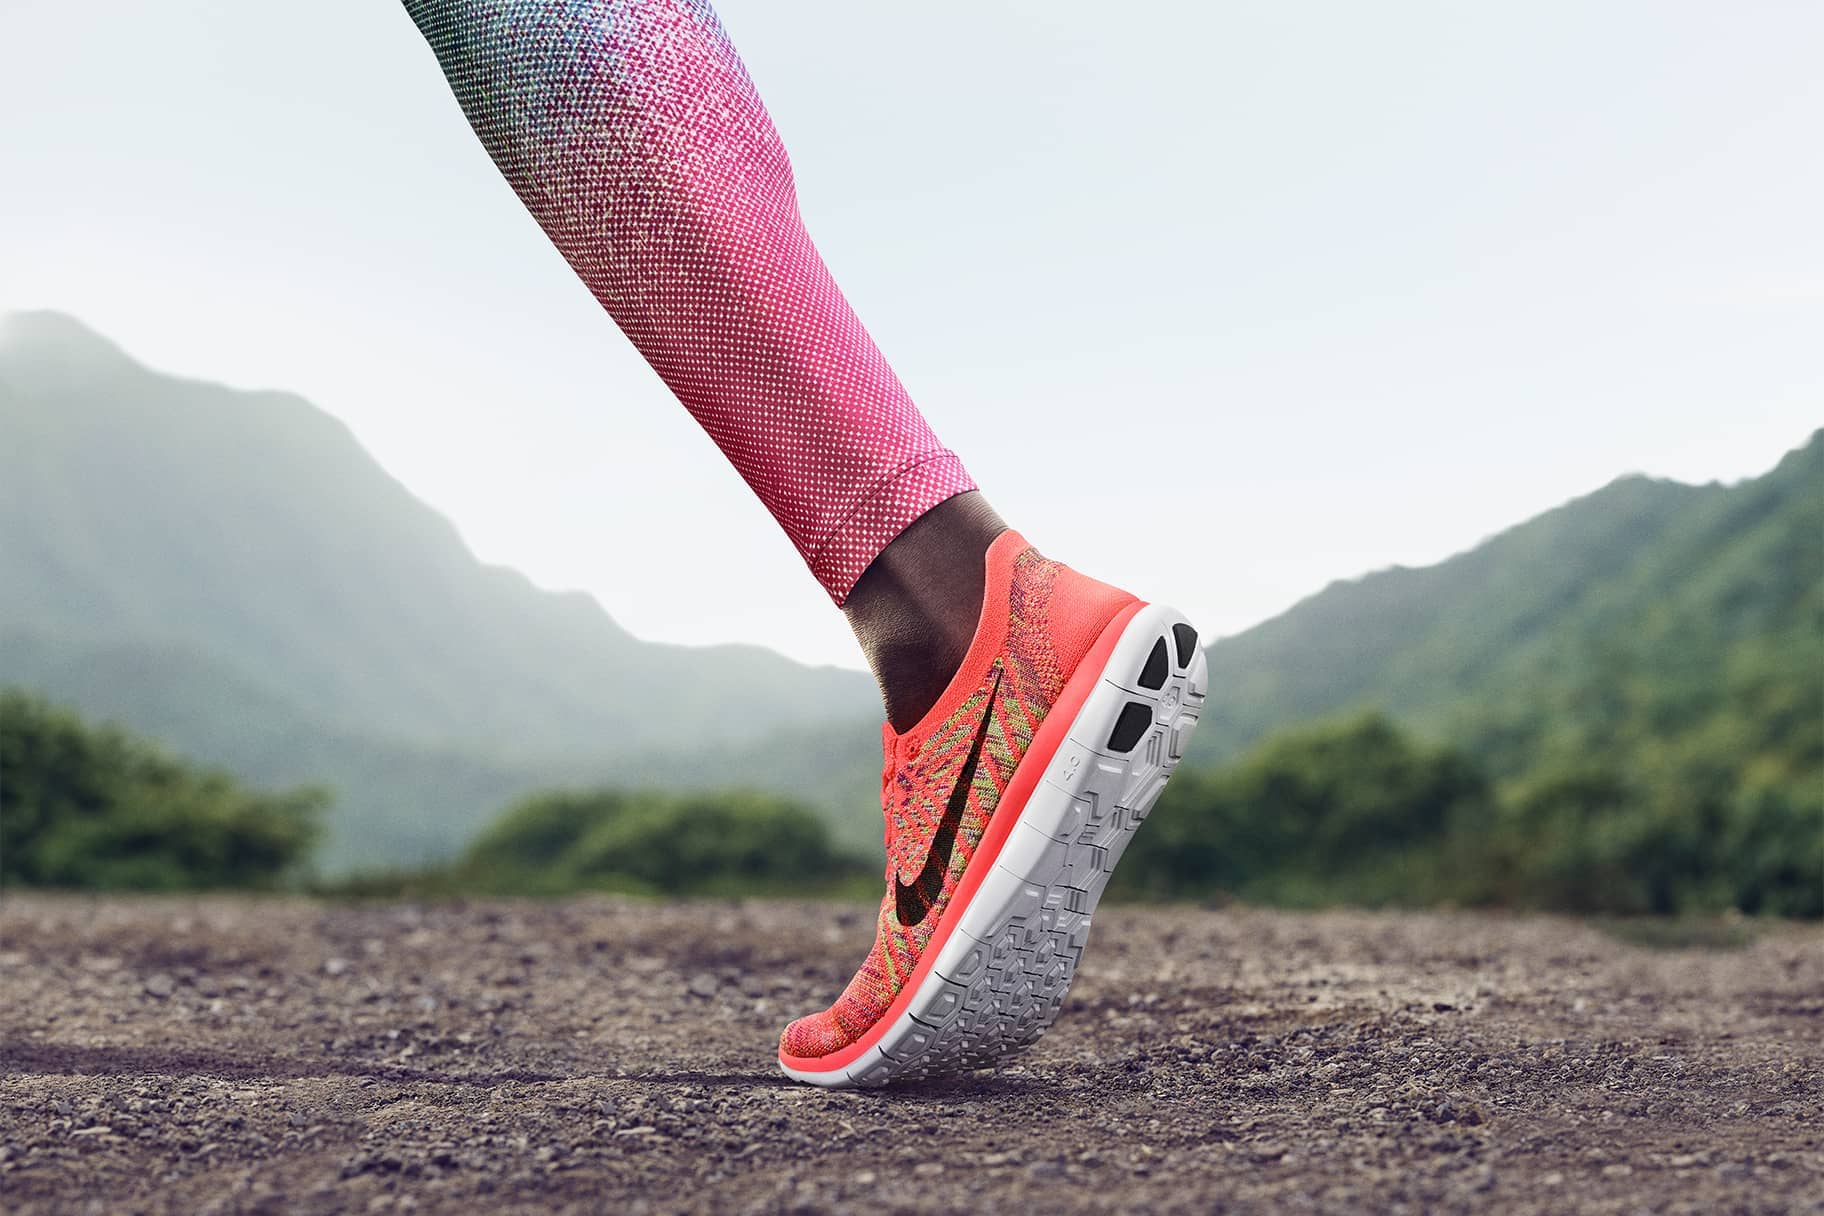 Tips for Buying Minimalist Barefoot Running Shoes. Nike NL